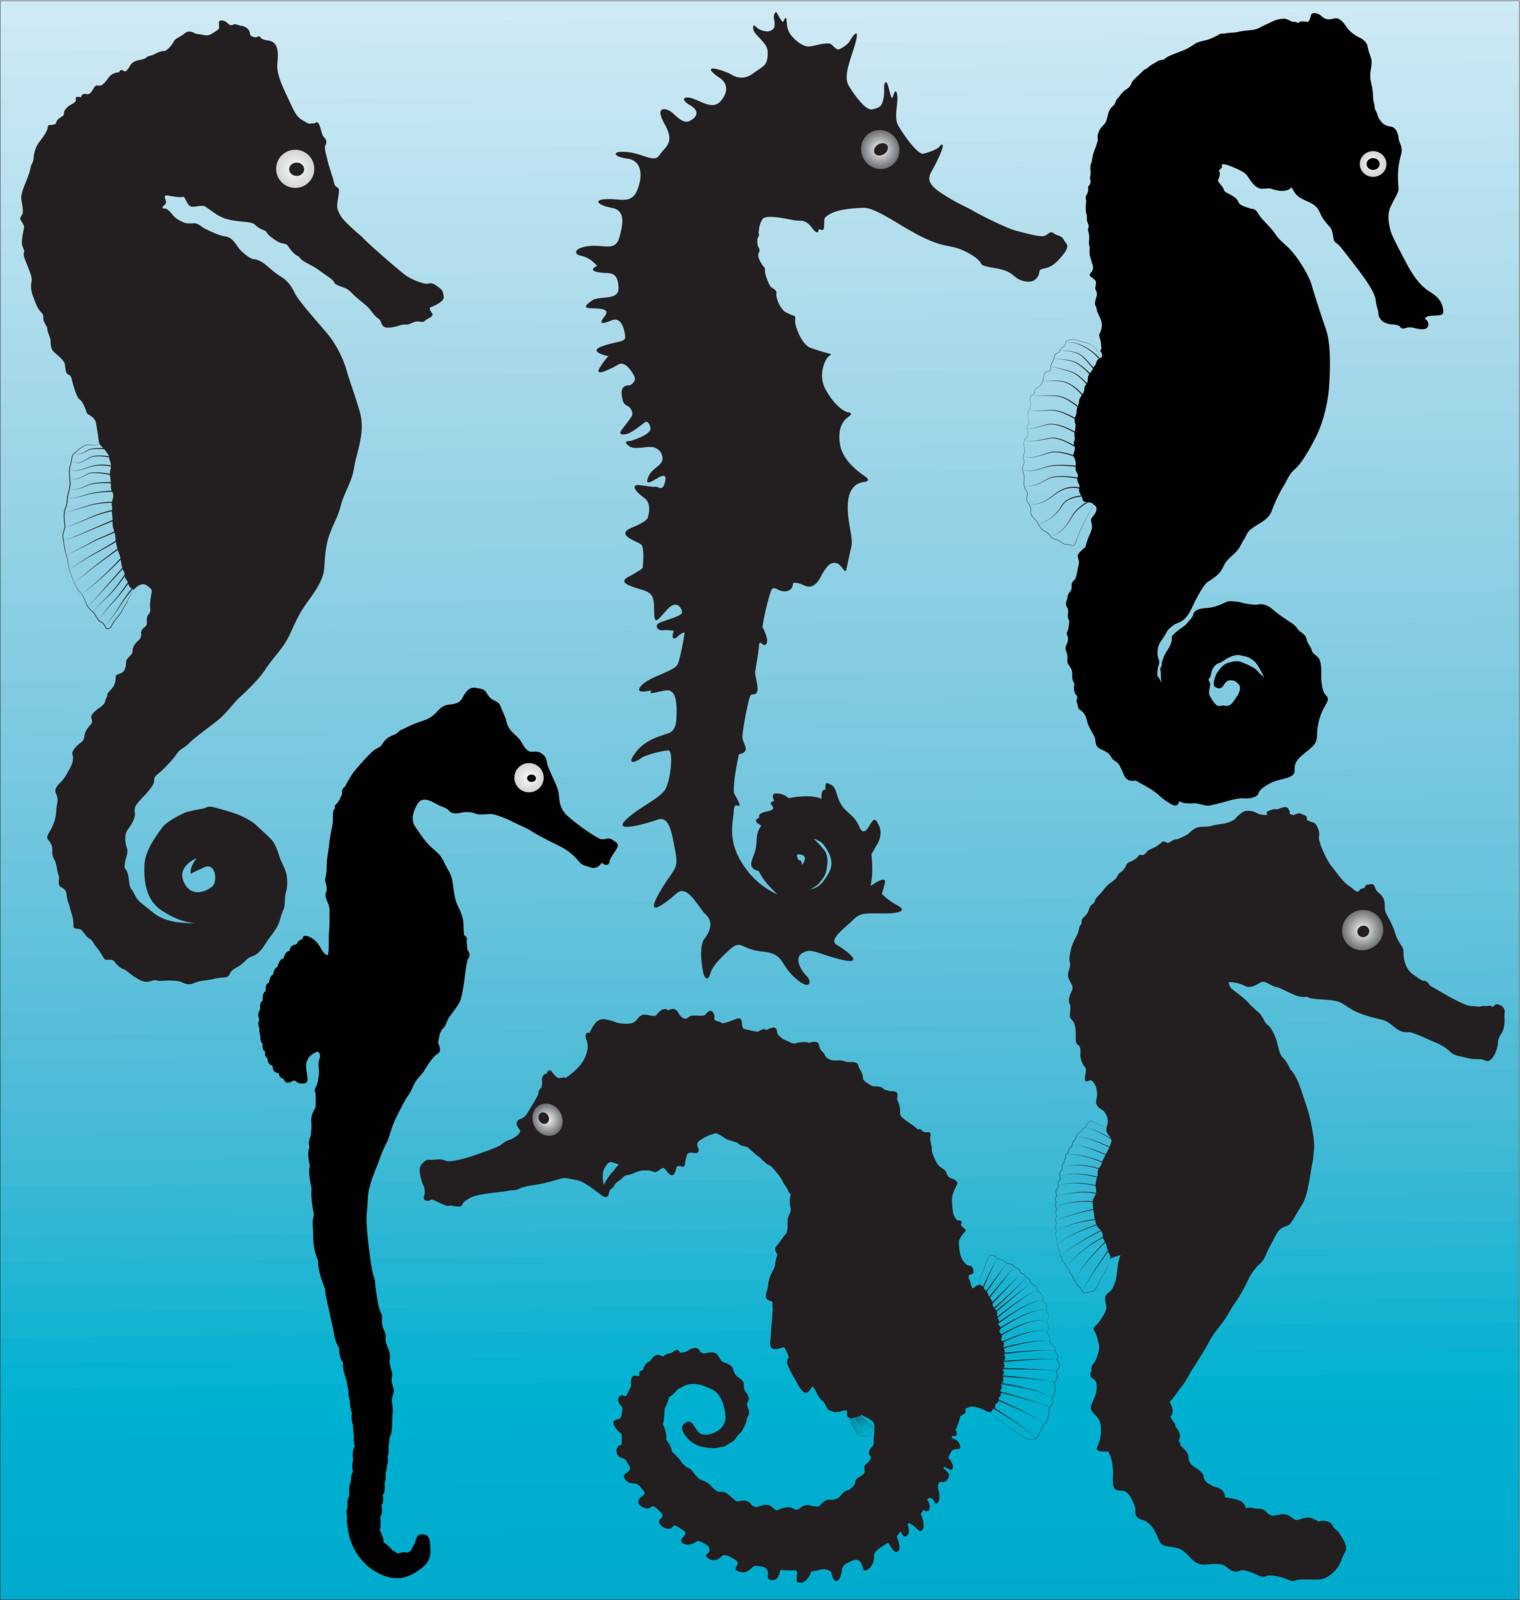 Seahorse vector silhouettes. Layered and fully editable.